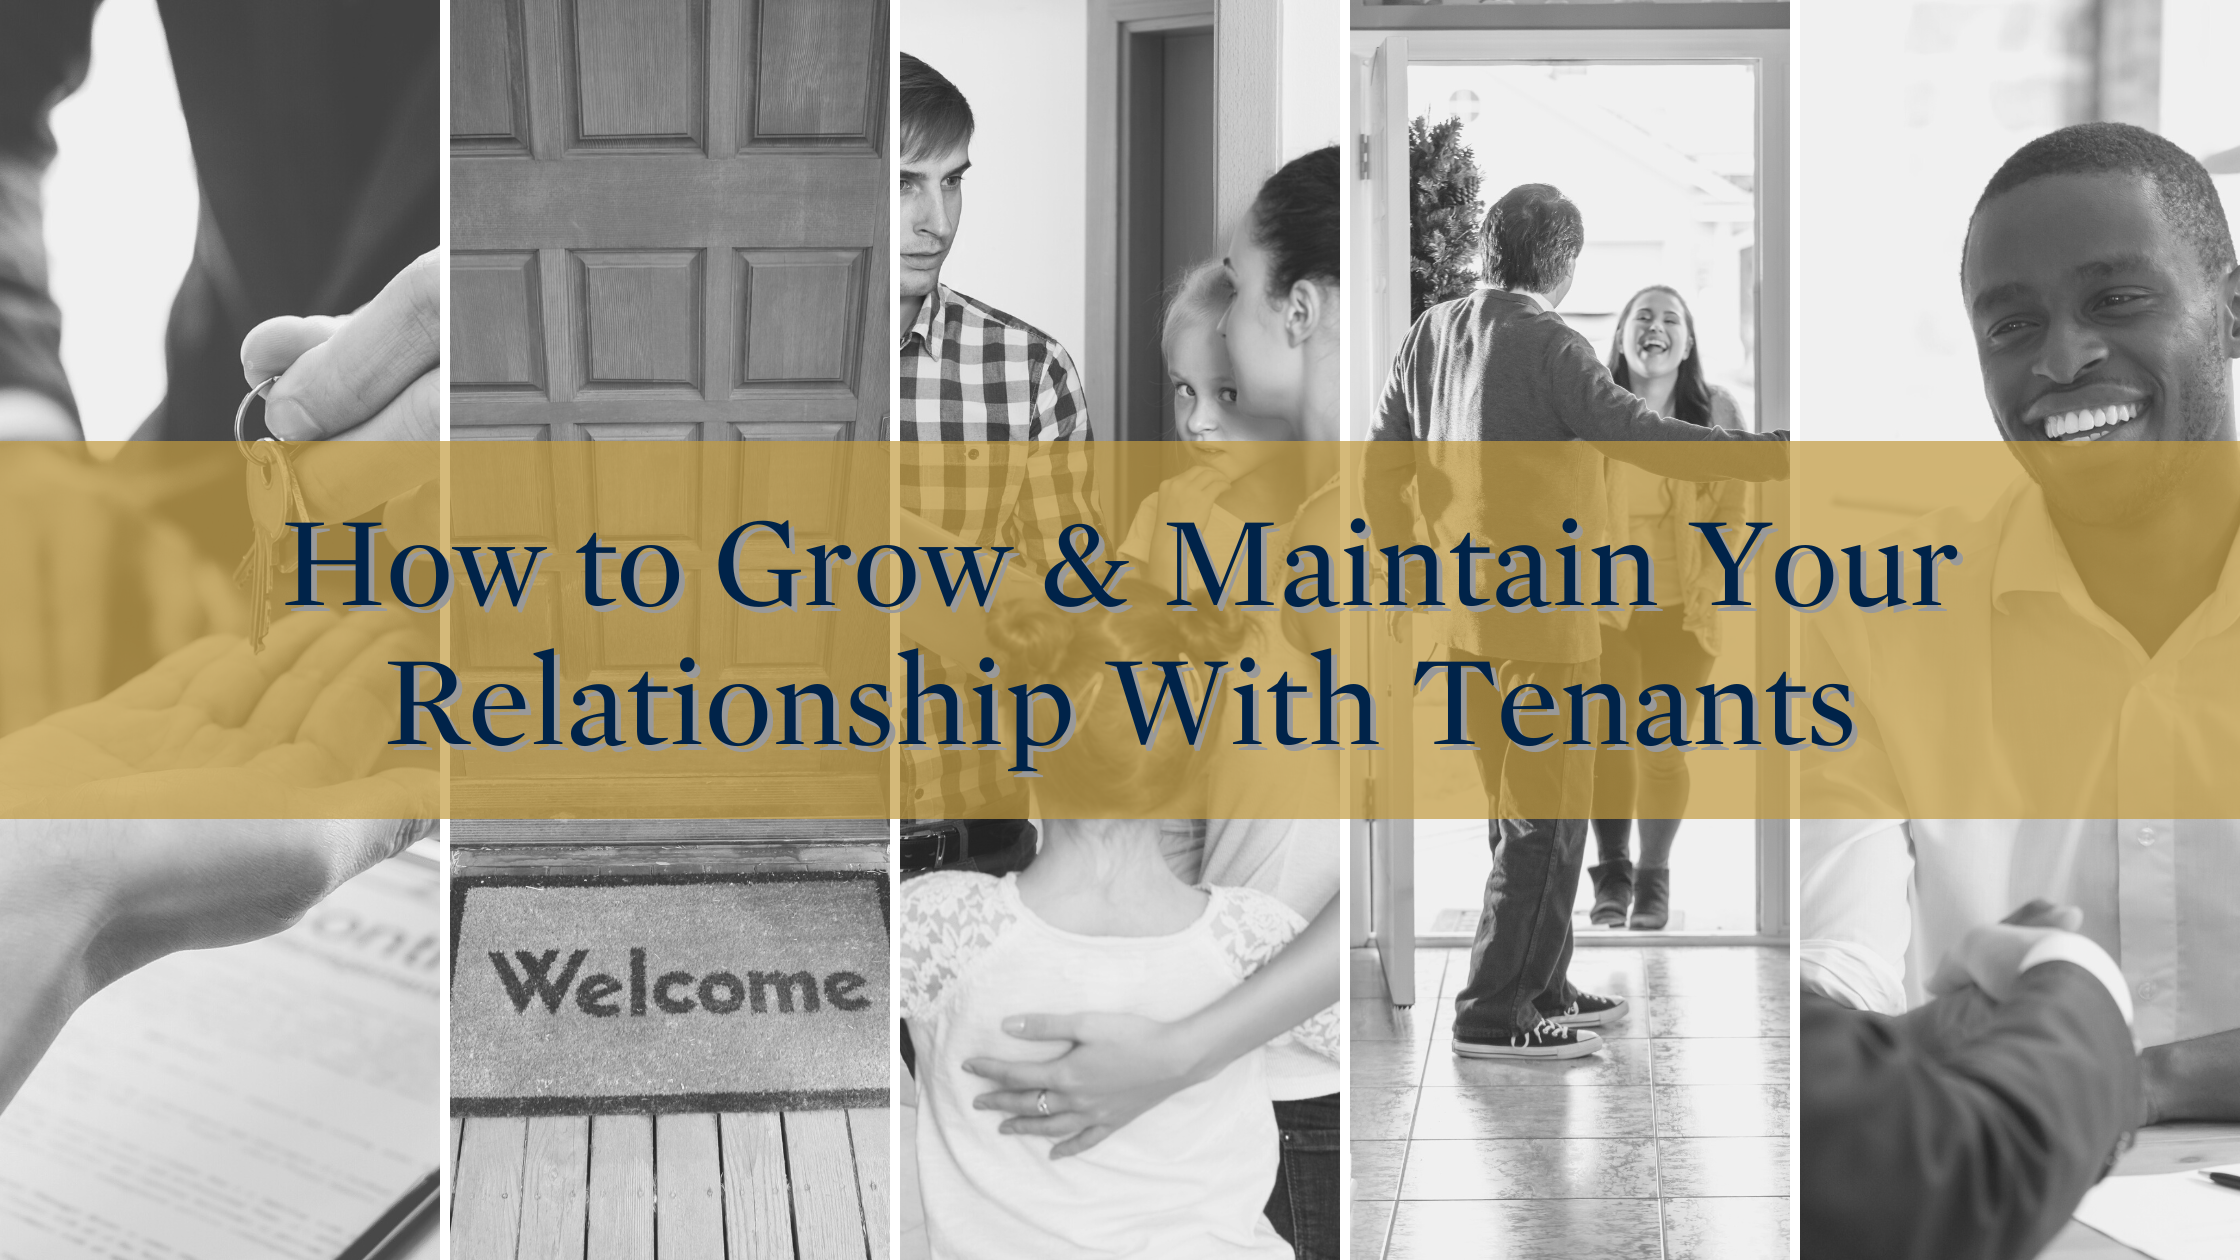 How to Grow and Maintain Your Relationship With Tenants